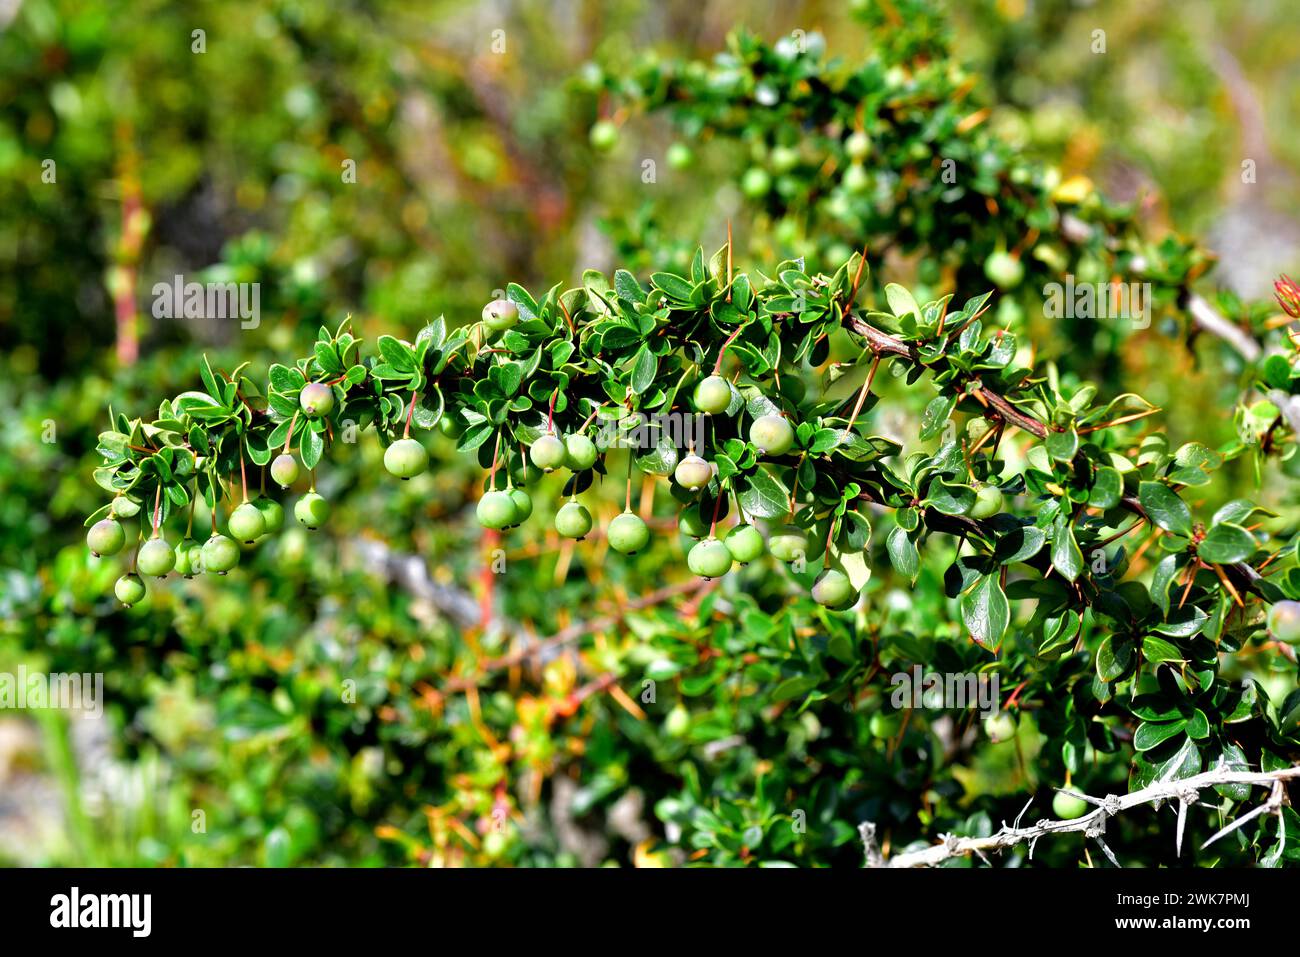 Calafate (Berberis microphylla or Berberis buxifolia) is an evergreen shrub endemic to Patagonia. Its fruits are edible. This photo was taken in Torre Stock Photo